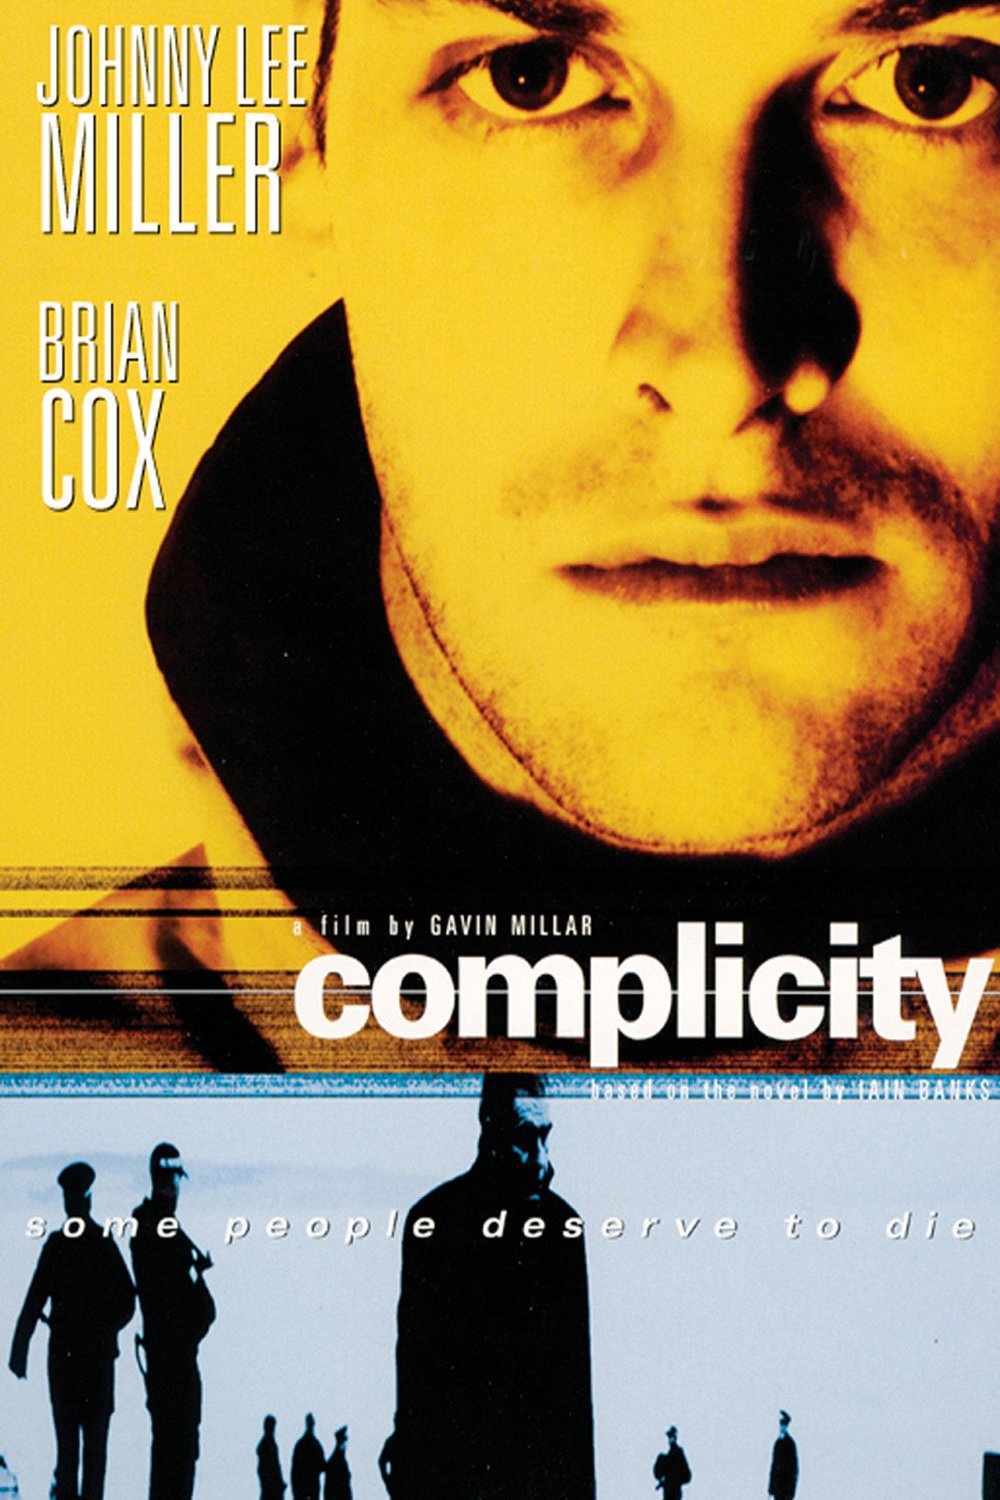 Poster of the movie Complicity